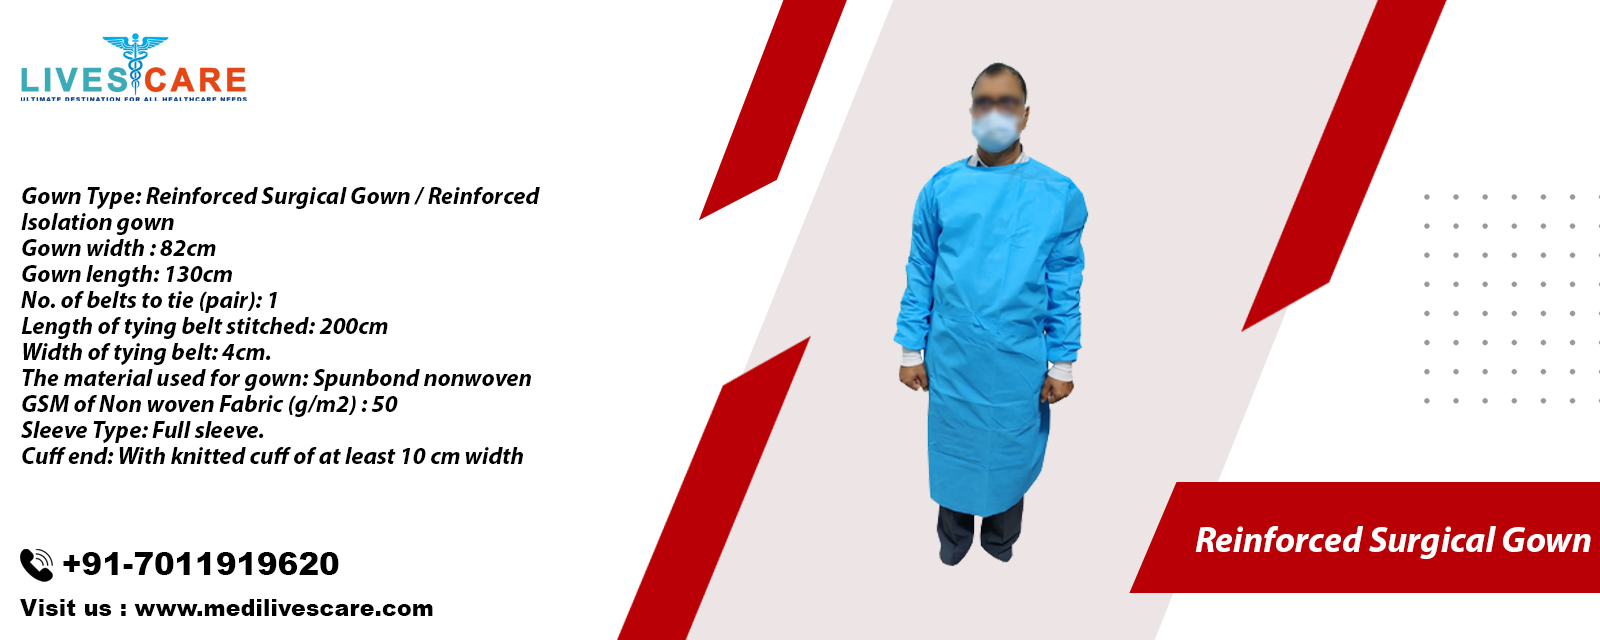 Reinforced Surgical Gown
Reinforced Surgical Gown Manufacturers
Reinforced Surgical Gown Manufacturers in India
Reinforced Surgical Gown Exporters in India
Reinforced Surgical Gown Suppliers in India